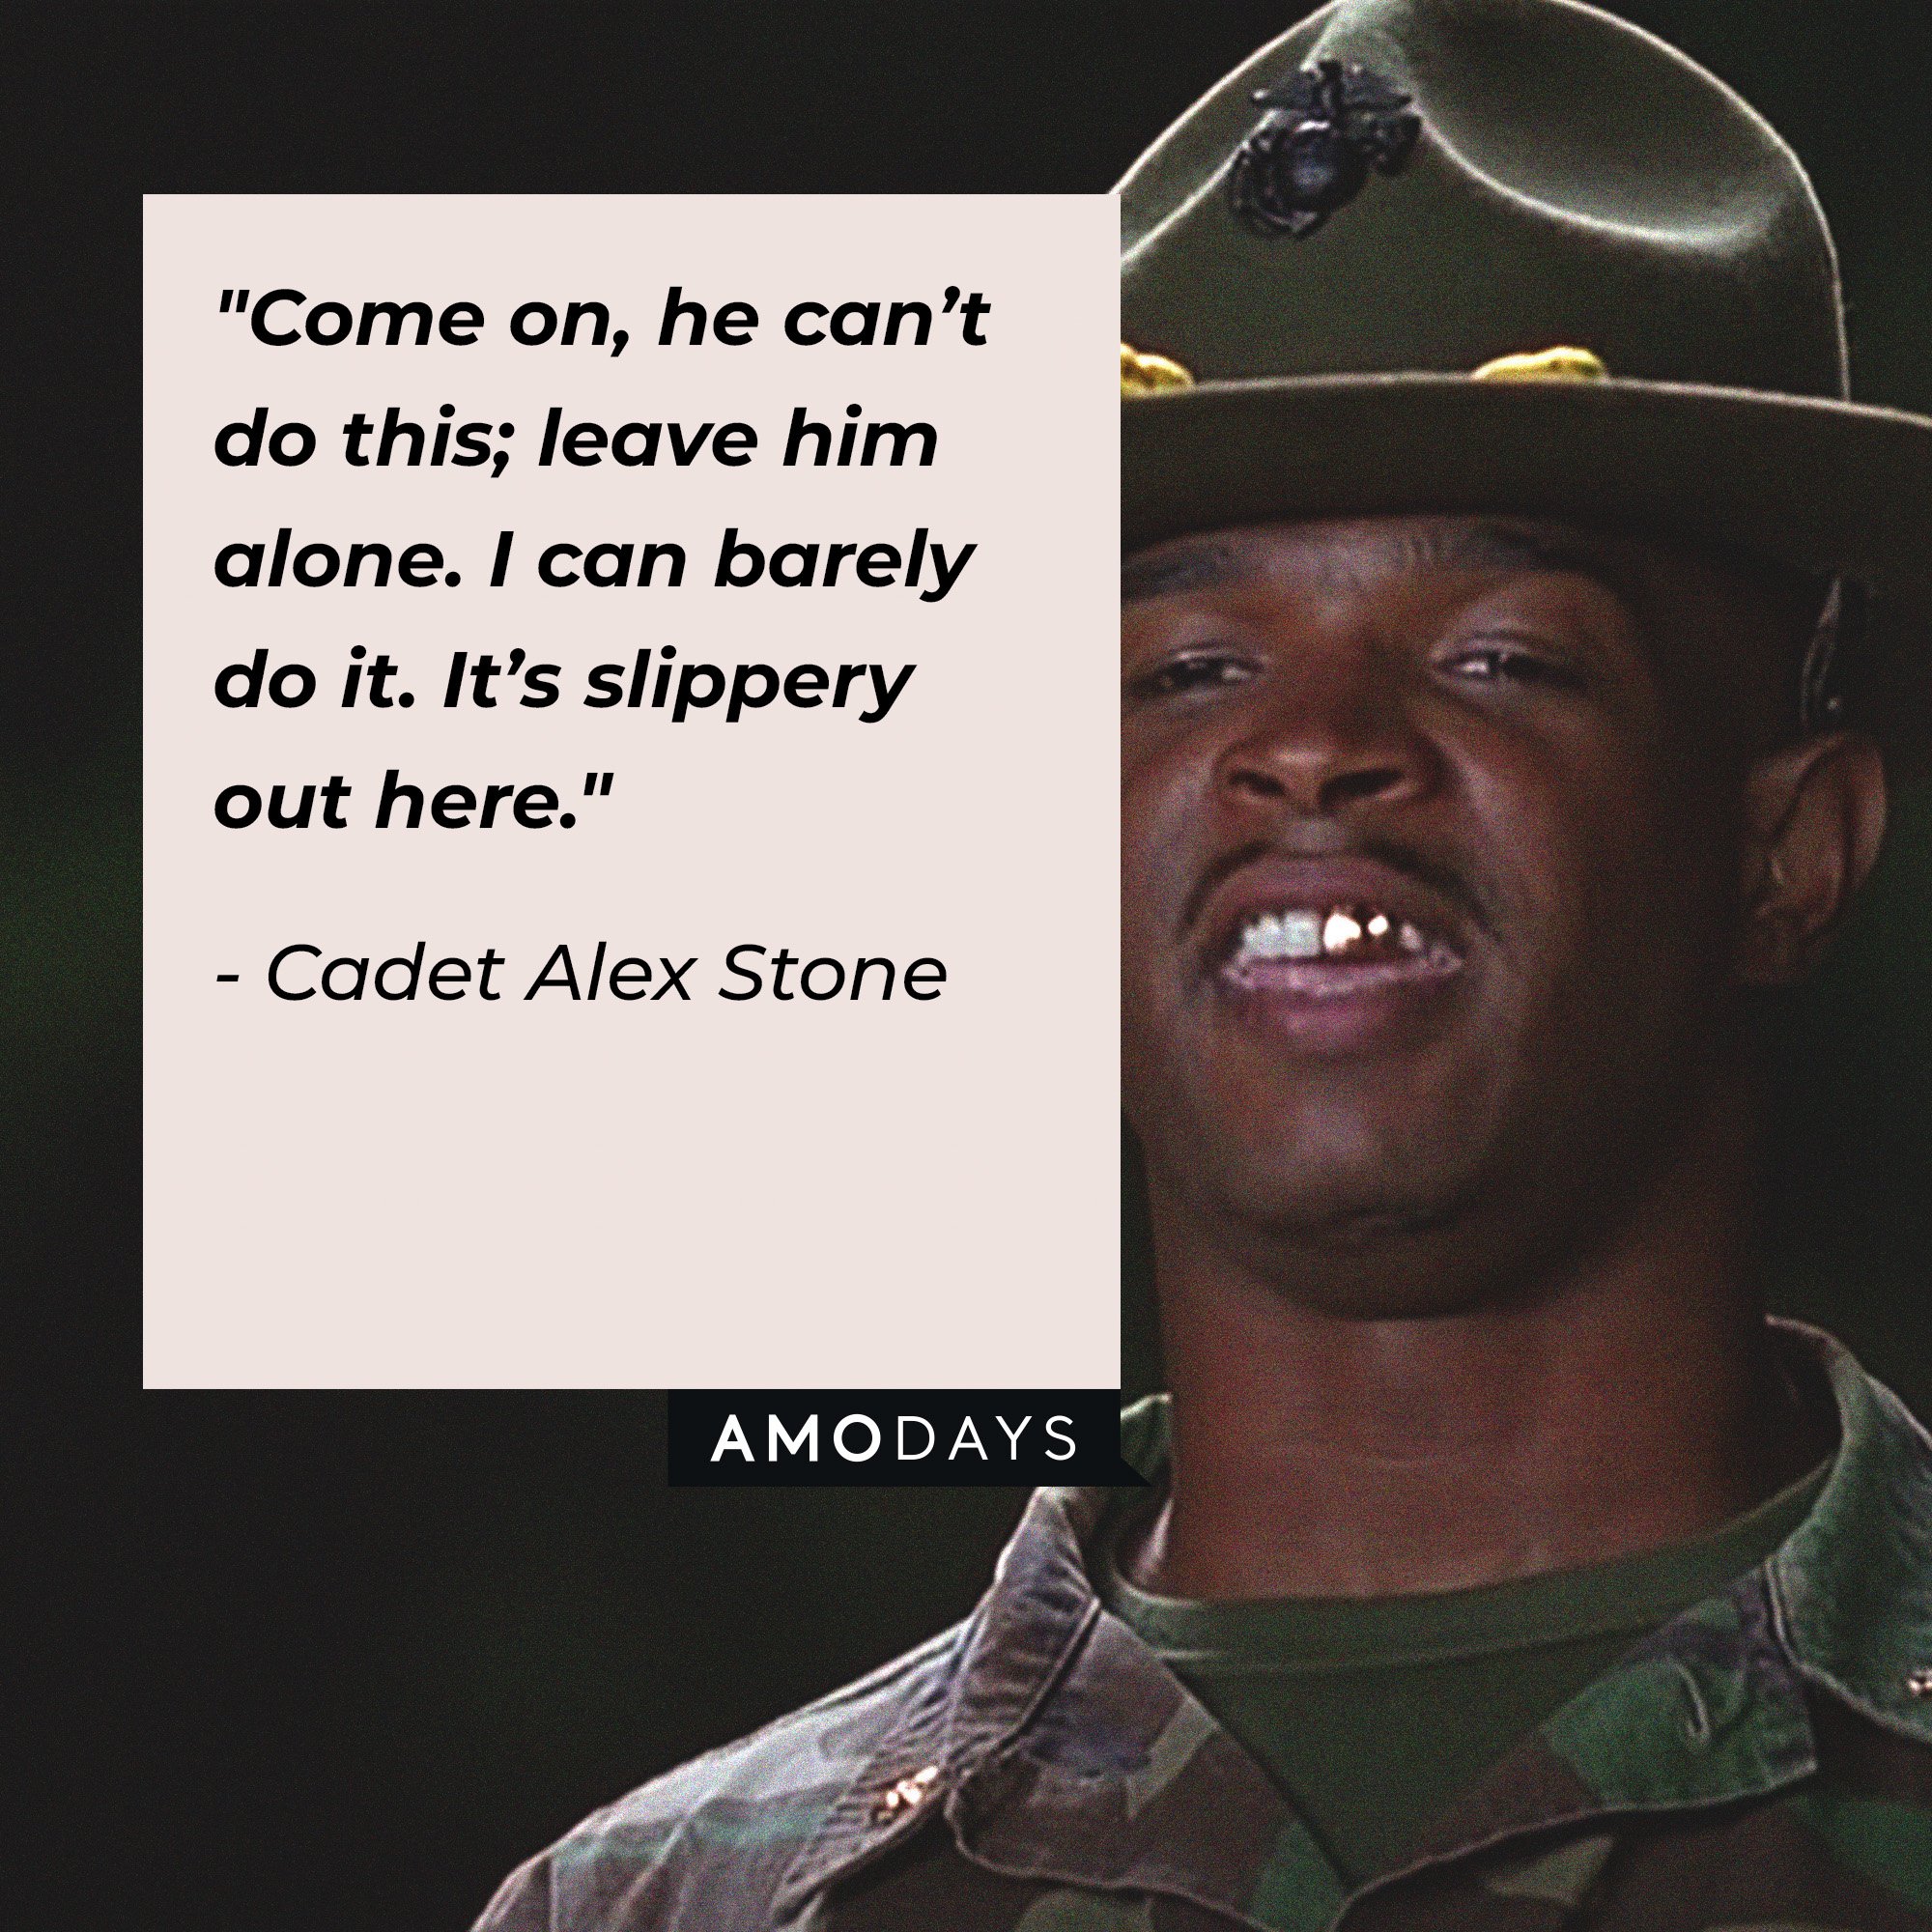 Cadet Alex Stone's quote: "Come on, guys. Relax, it's just a dummy grenade." | Source: Amodays